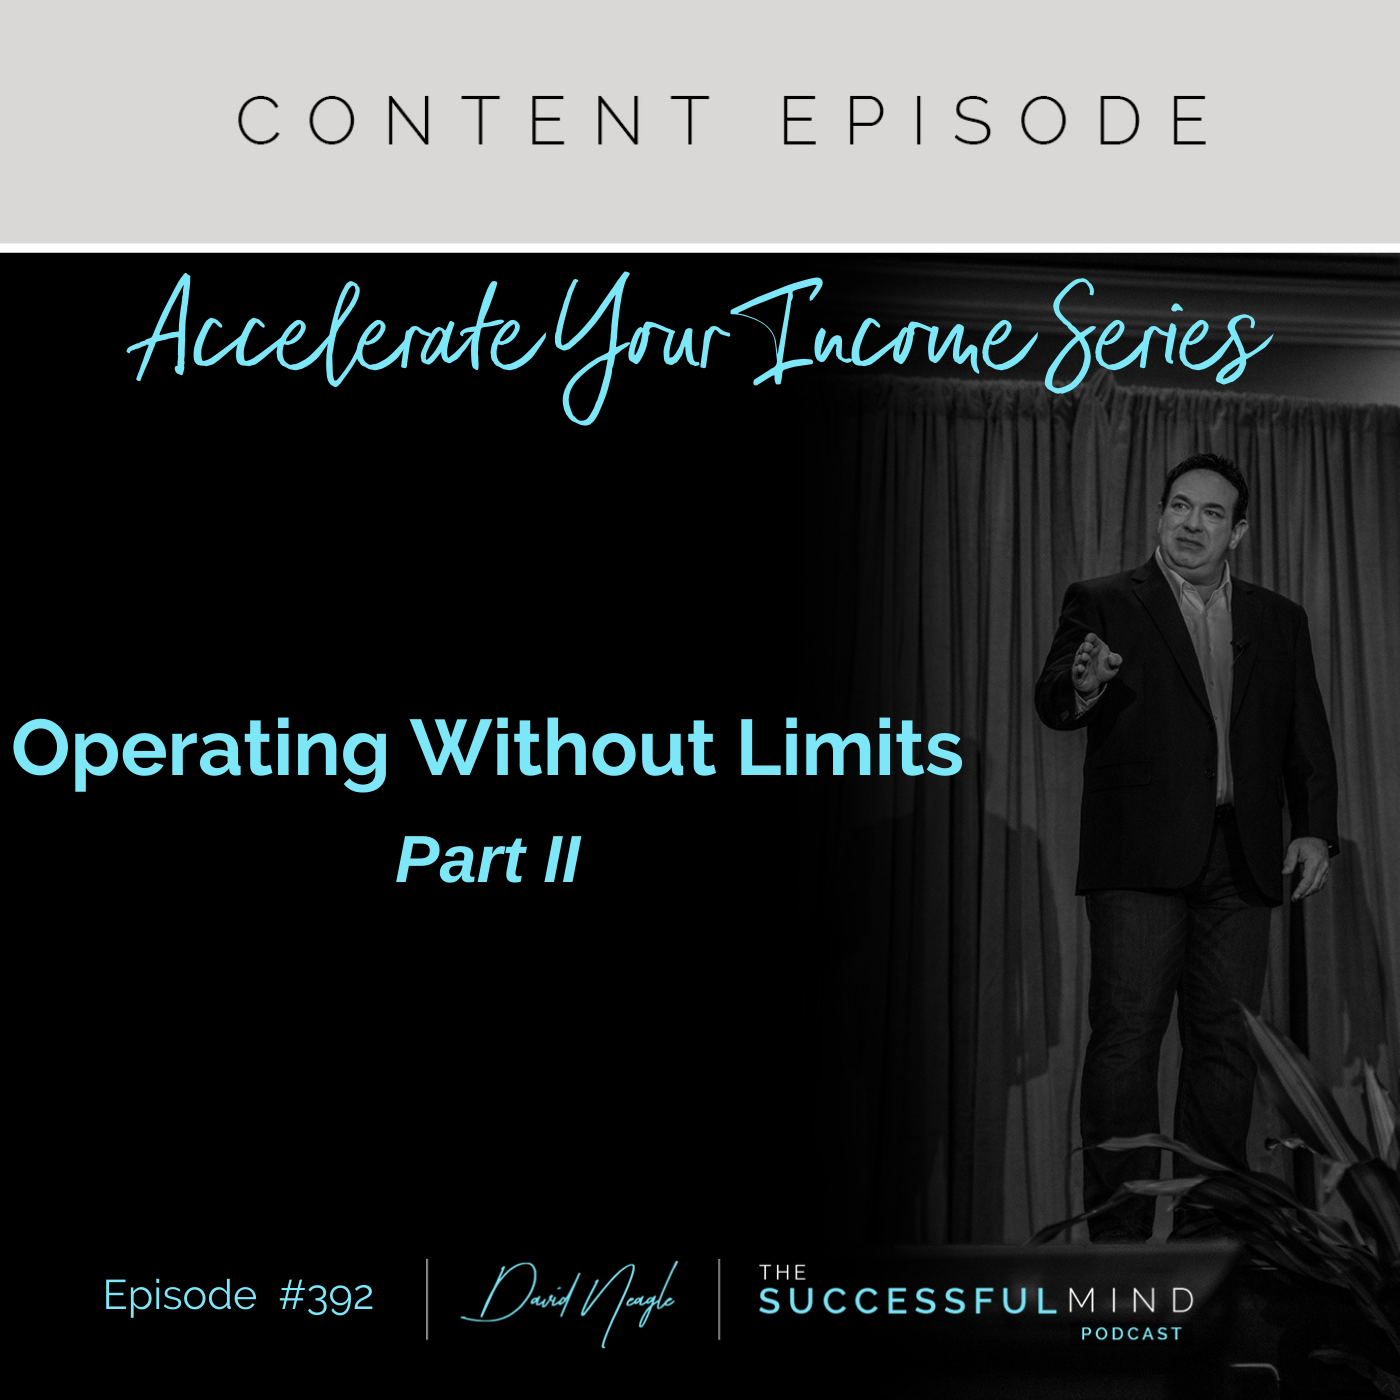 The Successful Mind Podcast - Episode 392 - Accelerate Your Income Series: Operating Without Limits - Part II